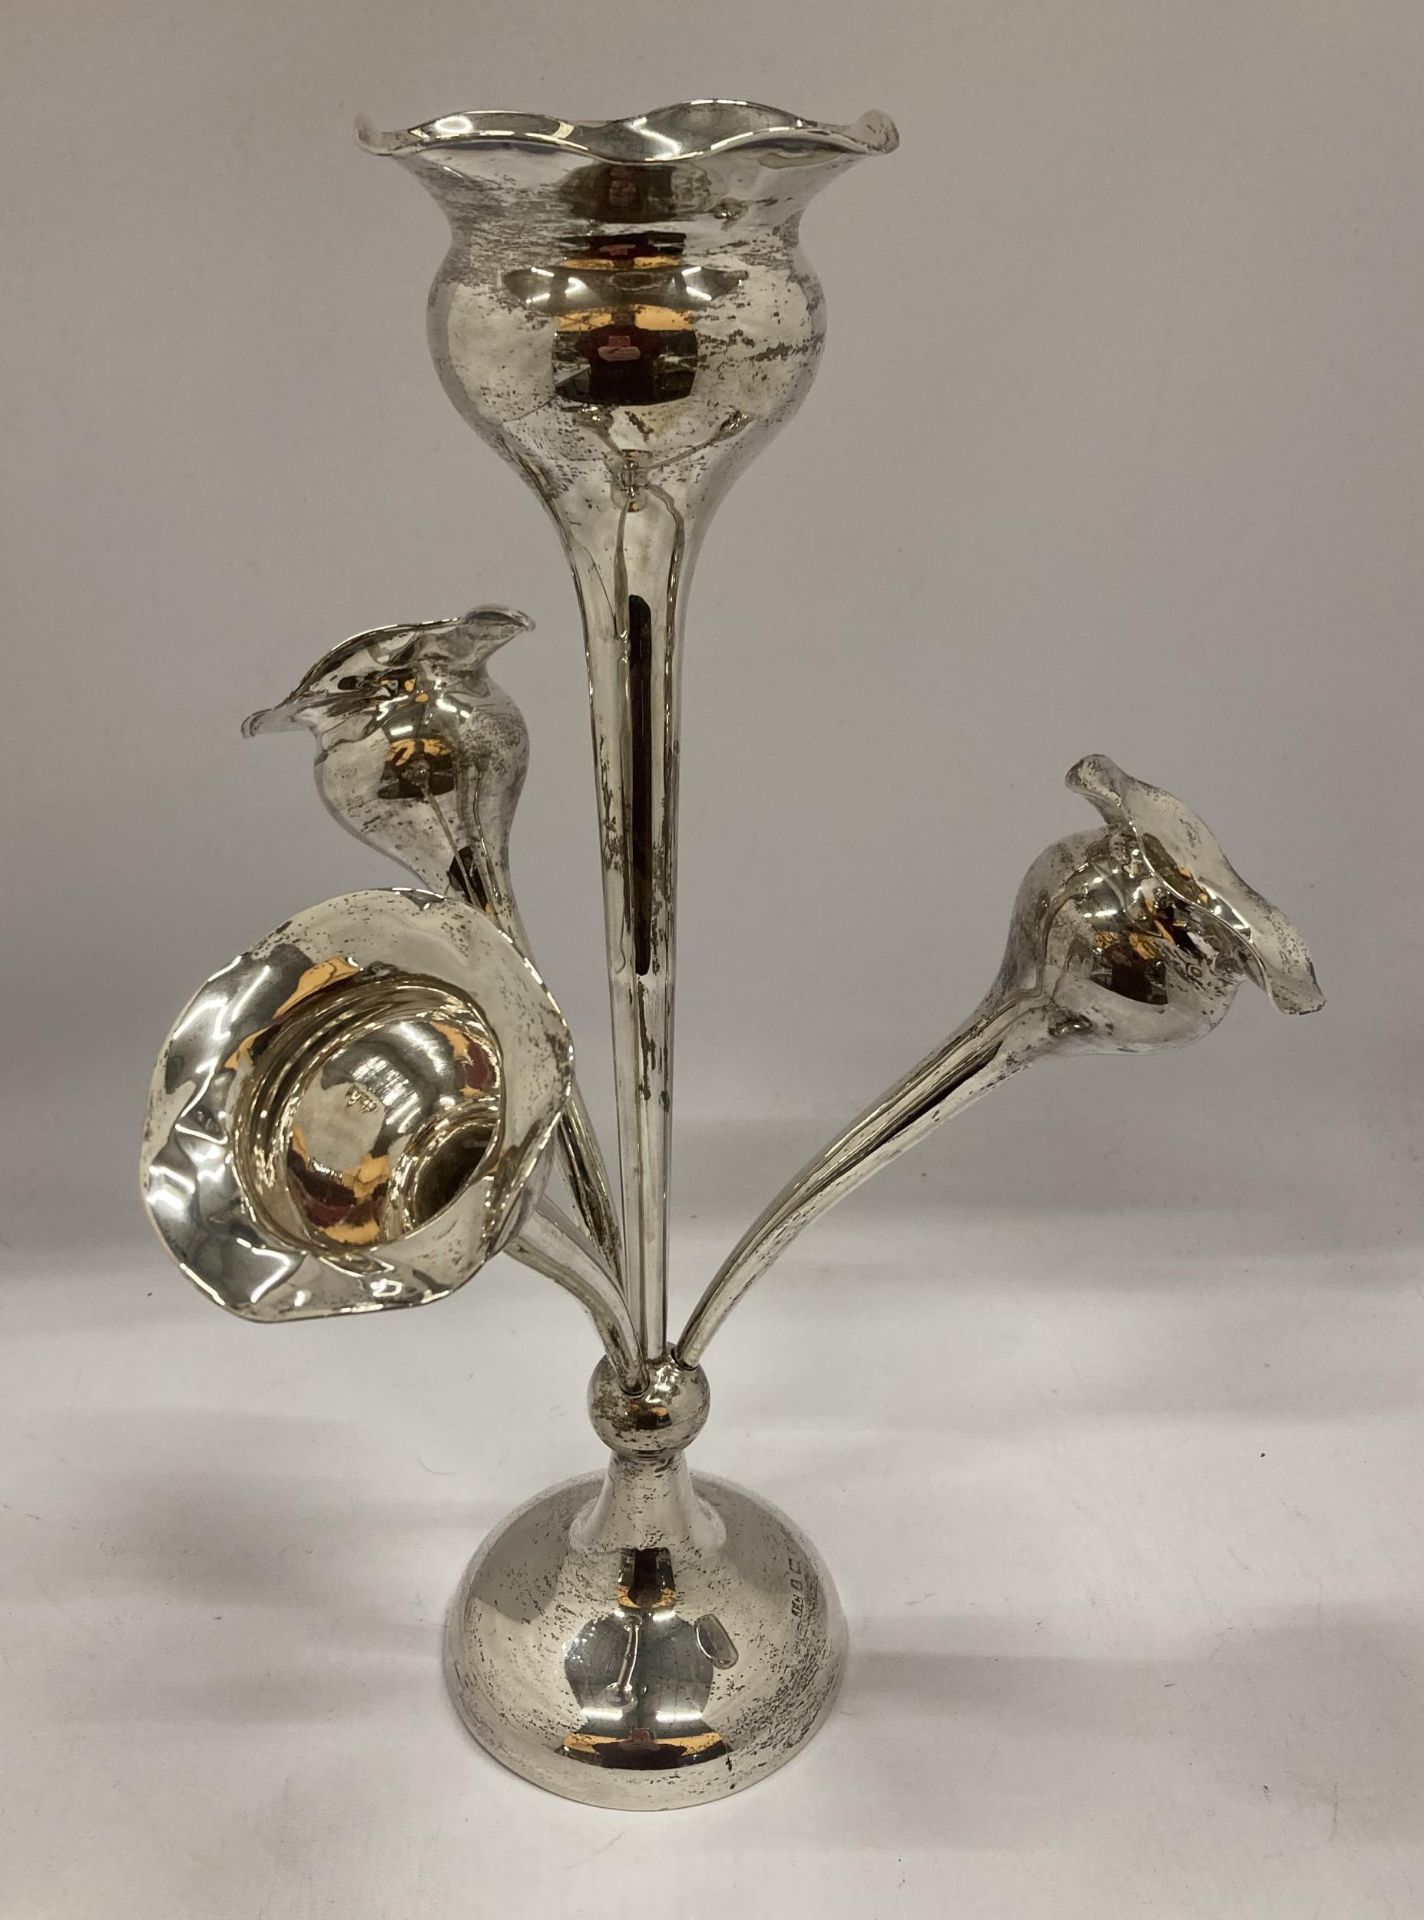 AN EARLY 20TH CENTURY BIRMINGHAM HALLMARKED SILVER EPERGNE WITH THREE DETACHABLE POSIES, MAKER J.